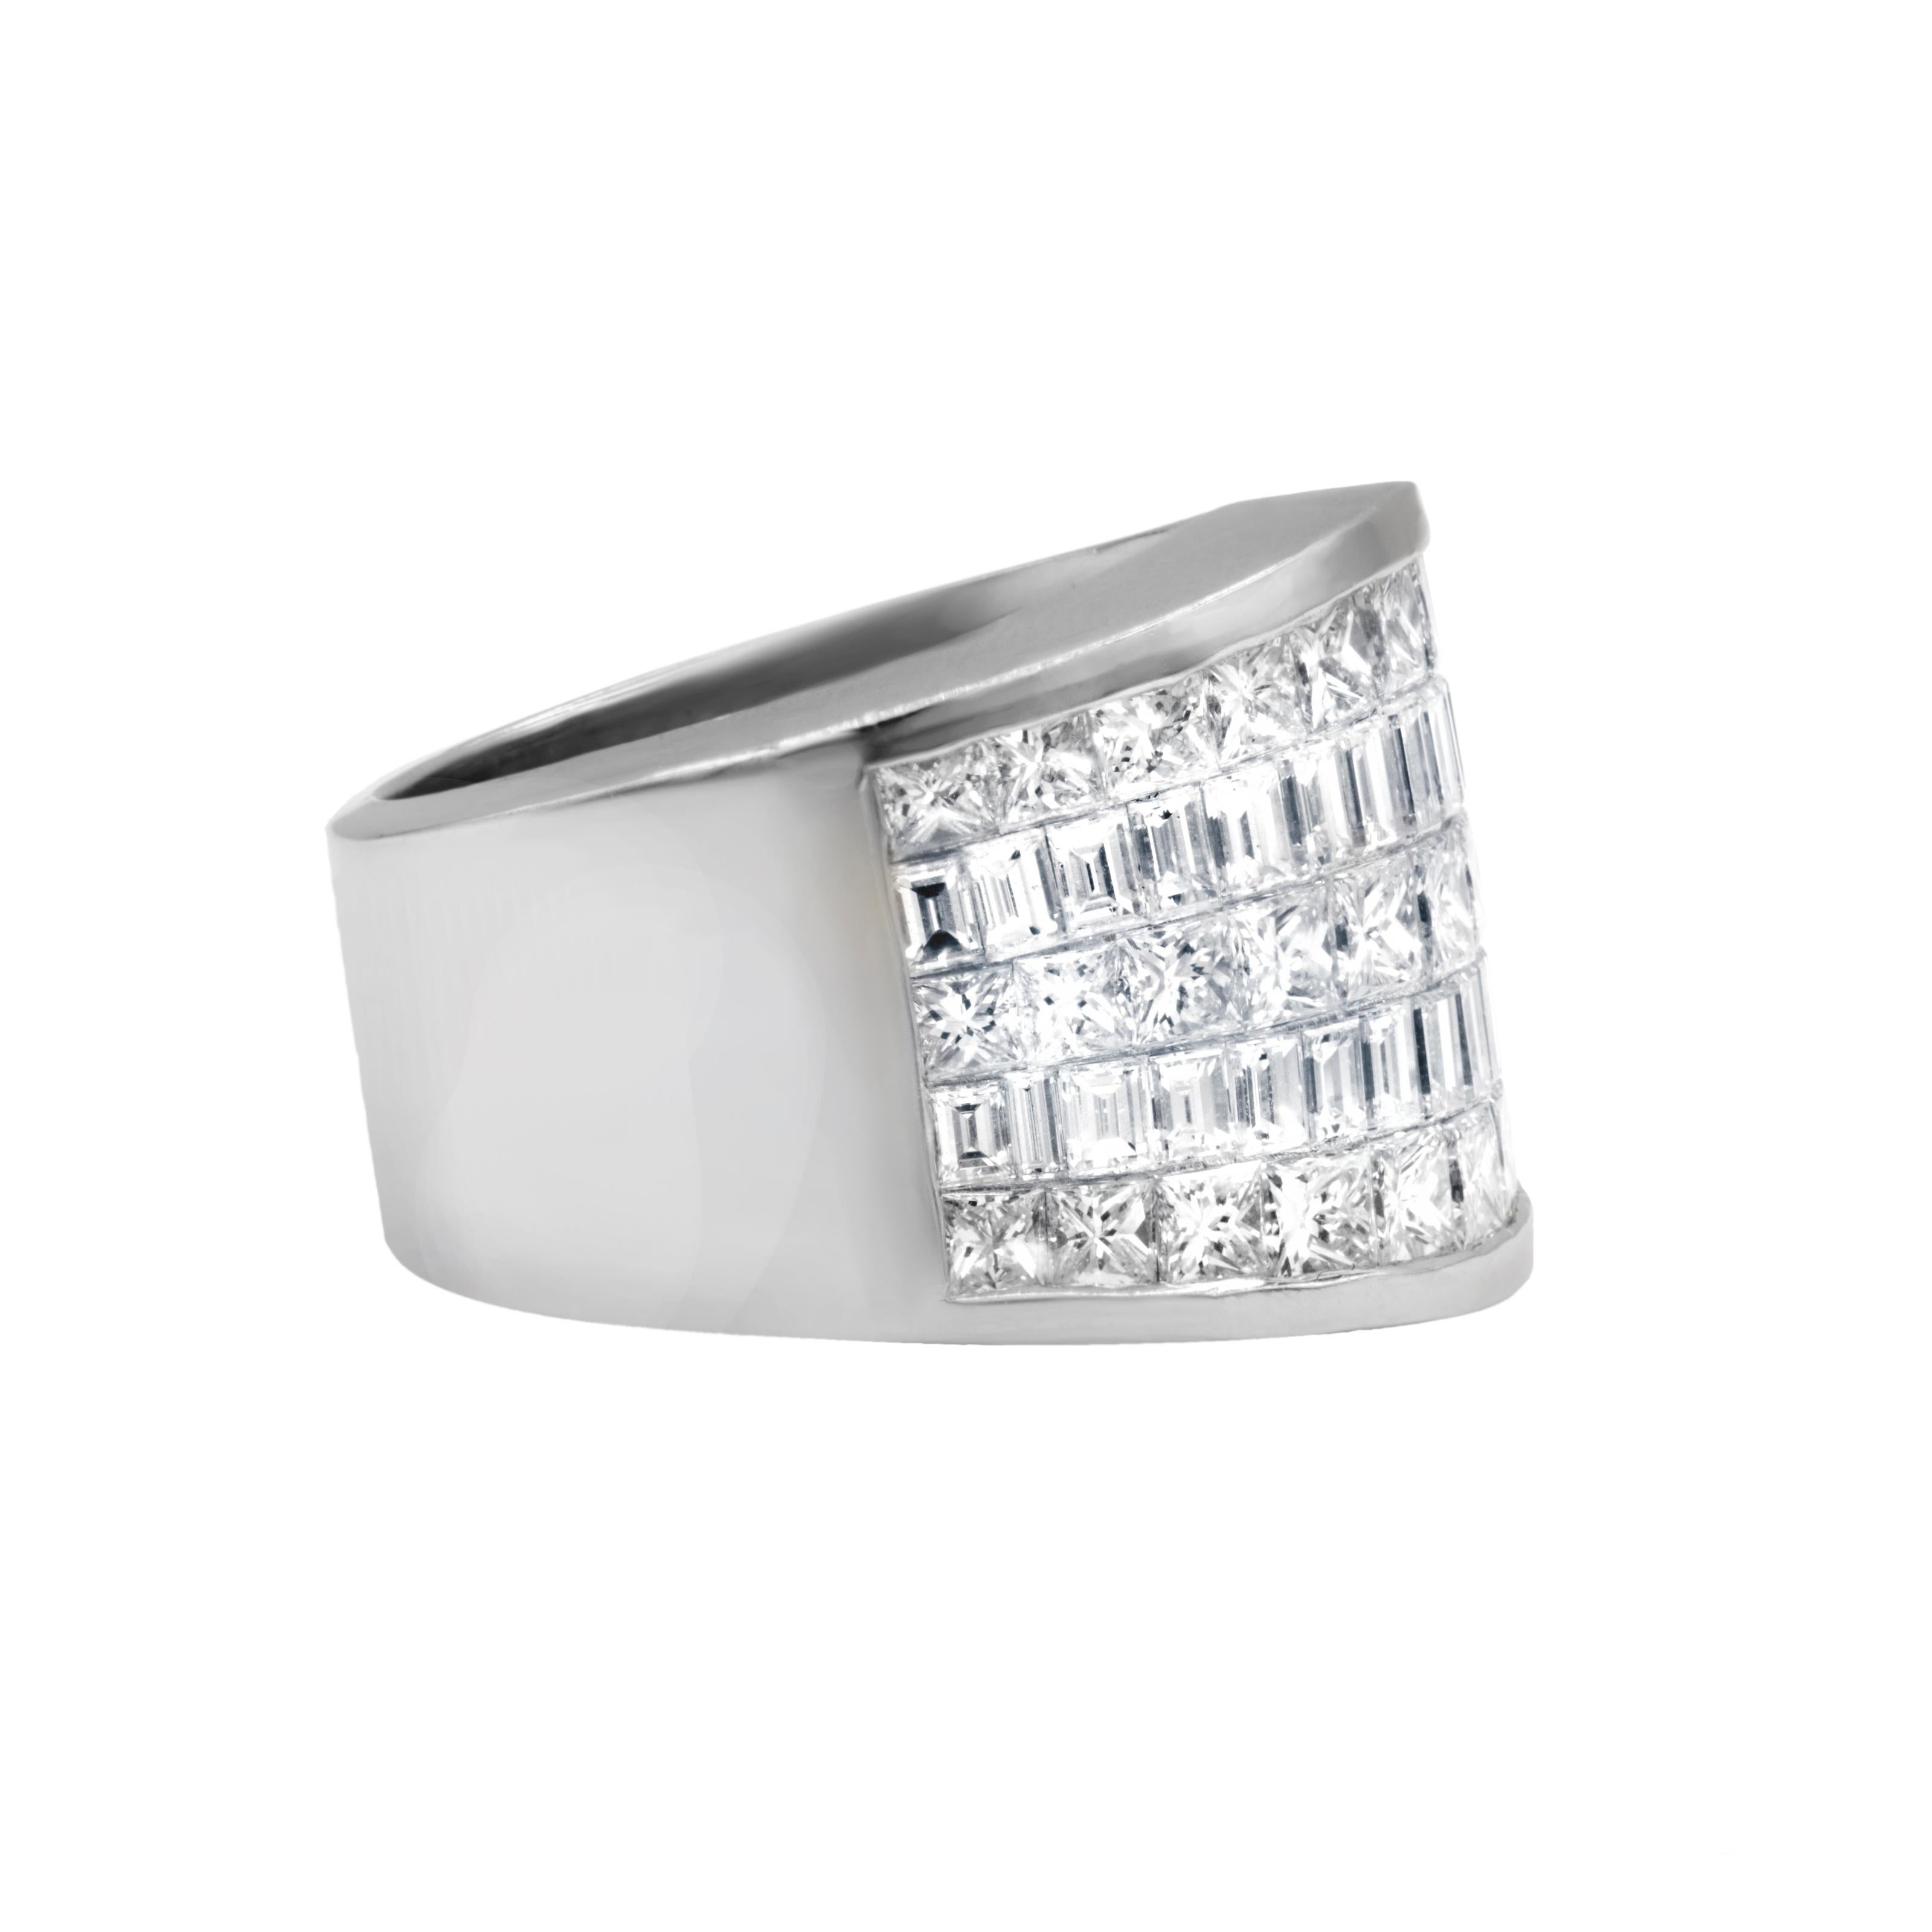 18 kt white gold diamond ring containing alternating rows of channel set princess and emerald cut diamonds totaling 5.00 cts.
Diana M. is a leading supplier of top-quality fine jewelry for over 35 years.
Diana M is one-stop shop for all your jewelry